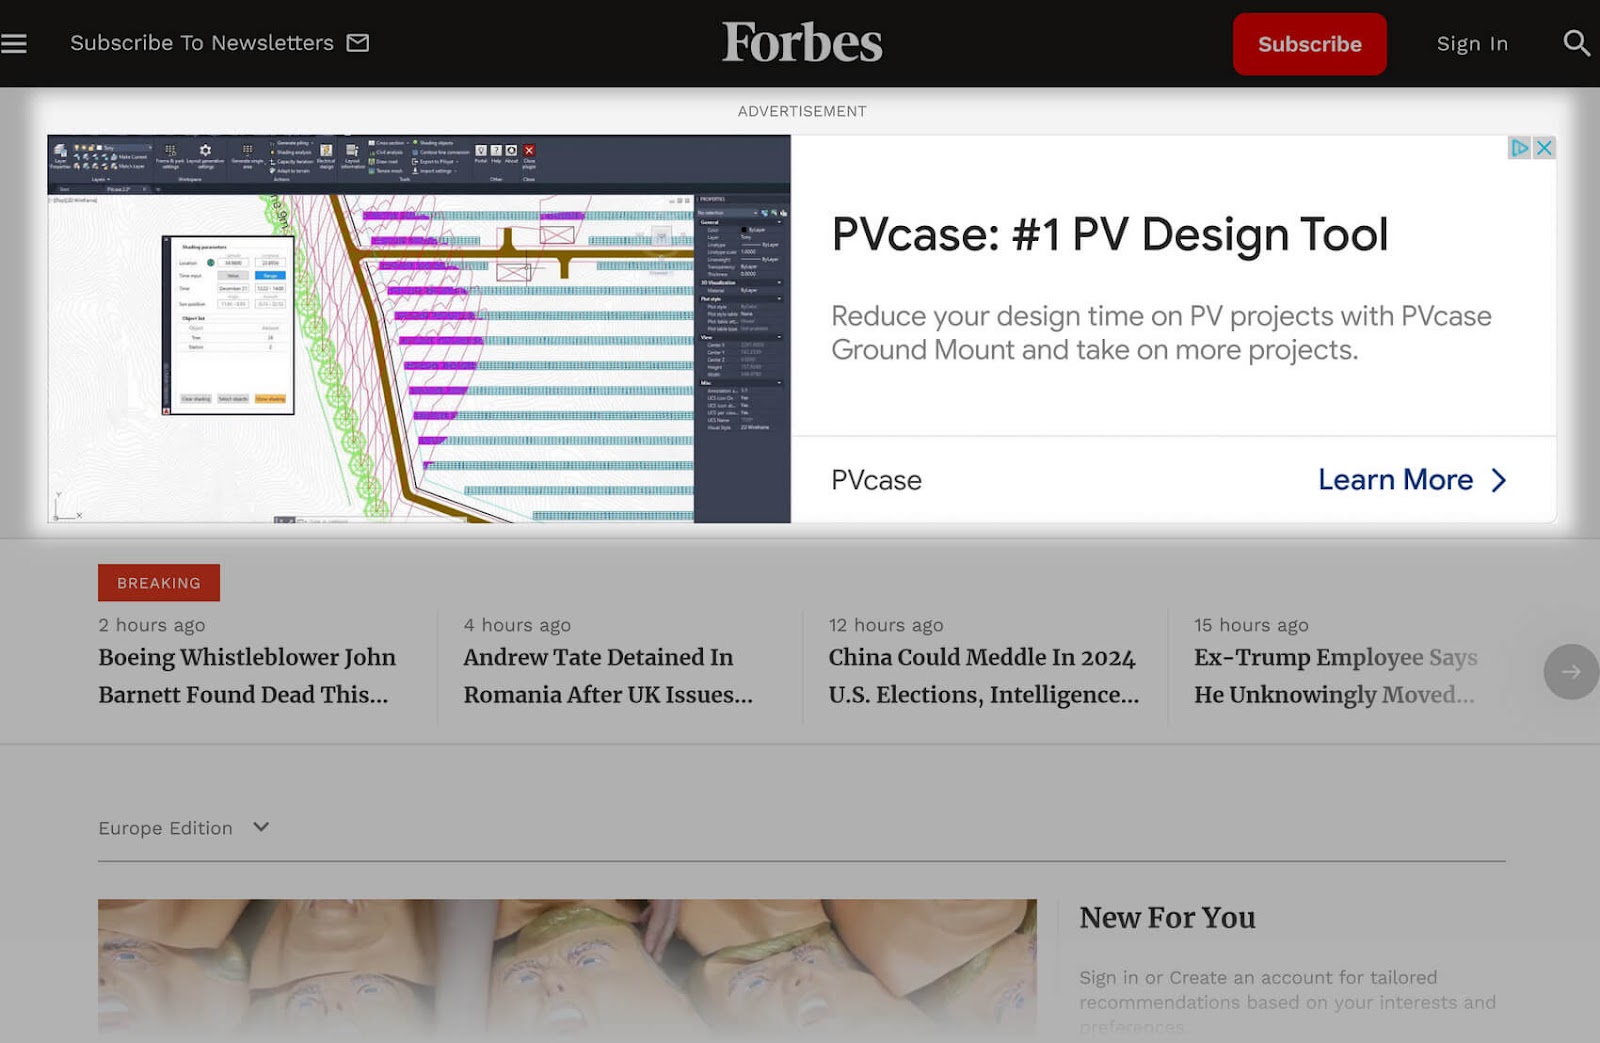 A show  advertisement  connected  Forbes’ homepage